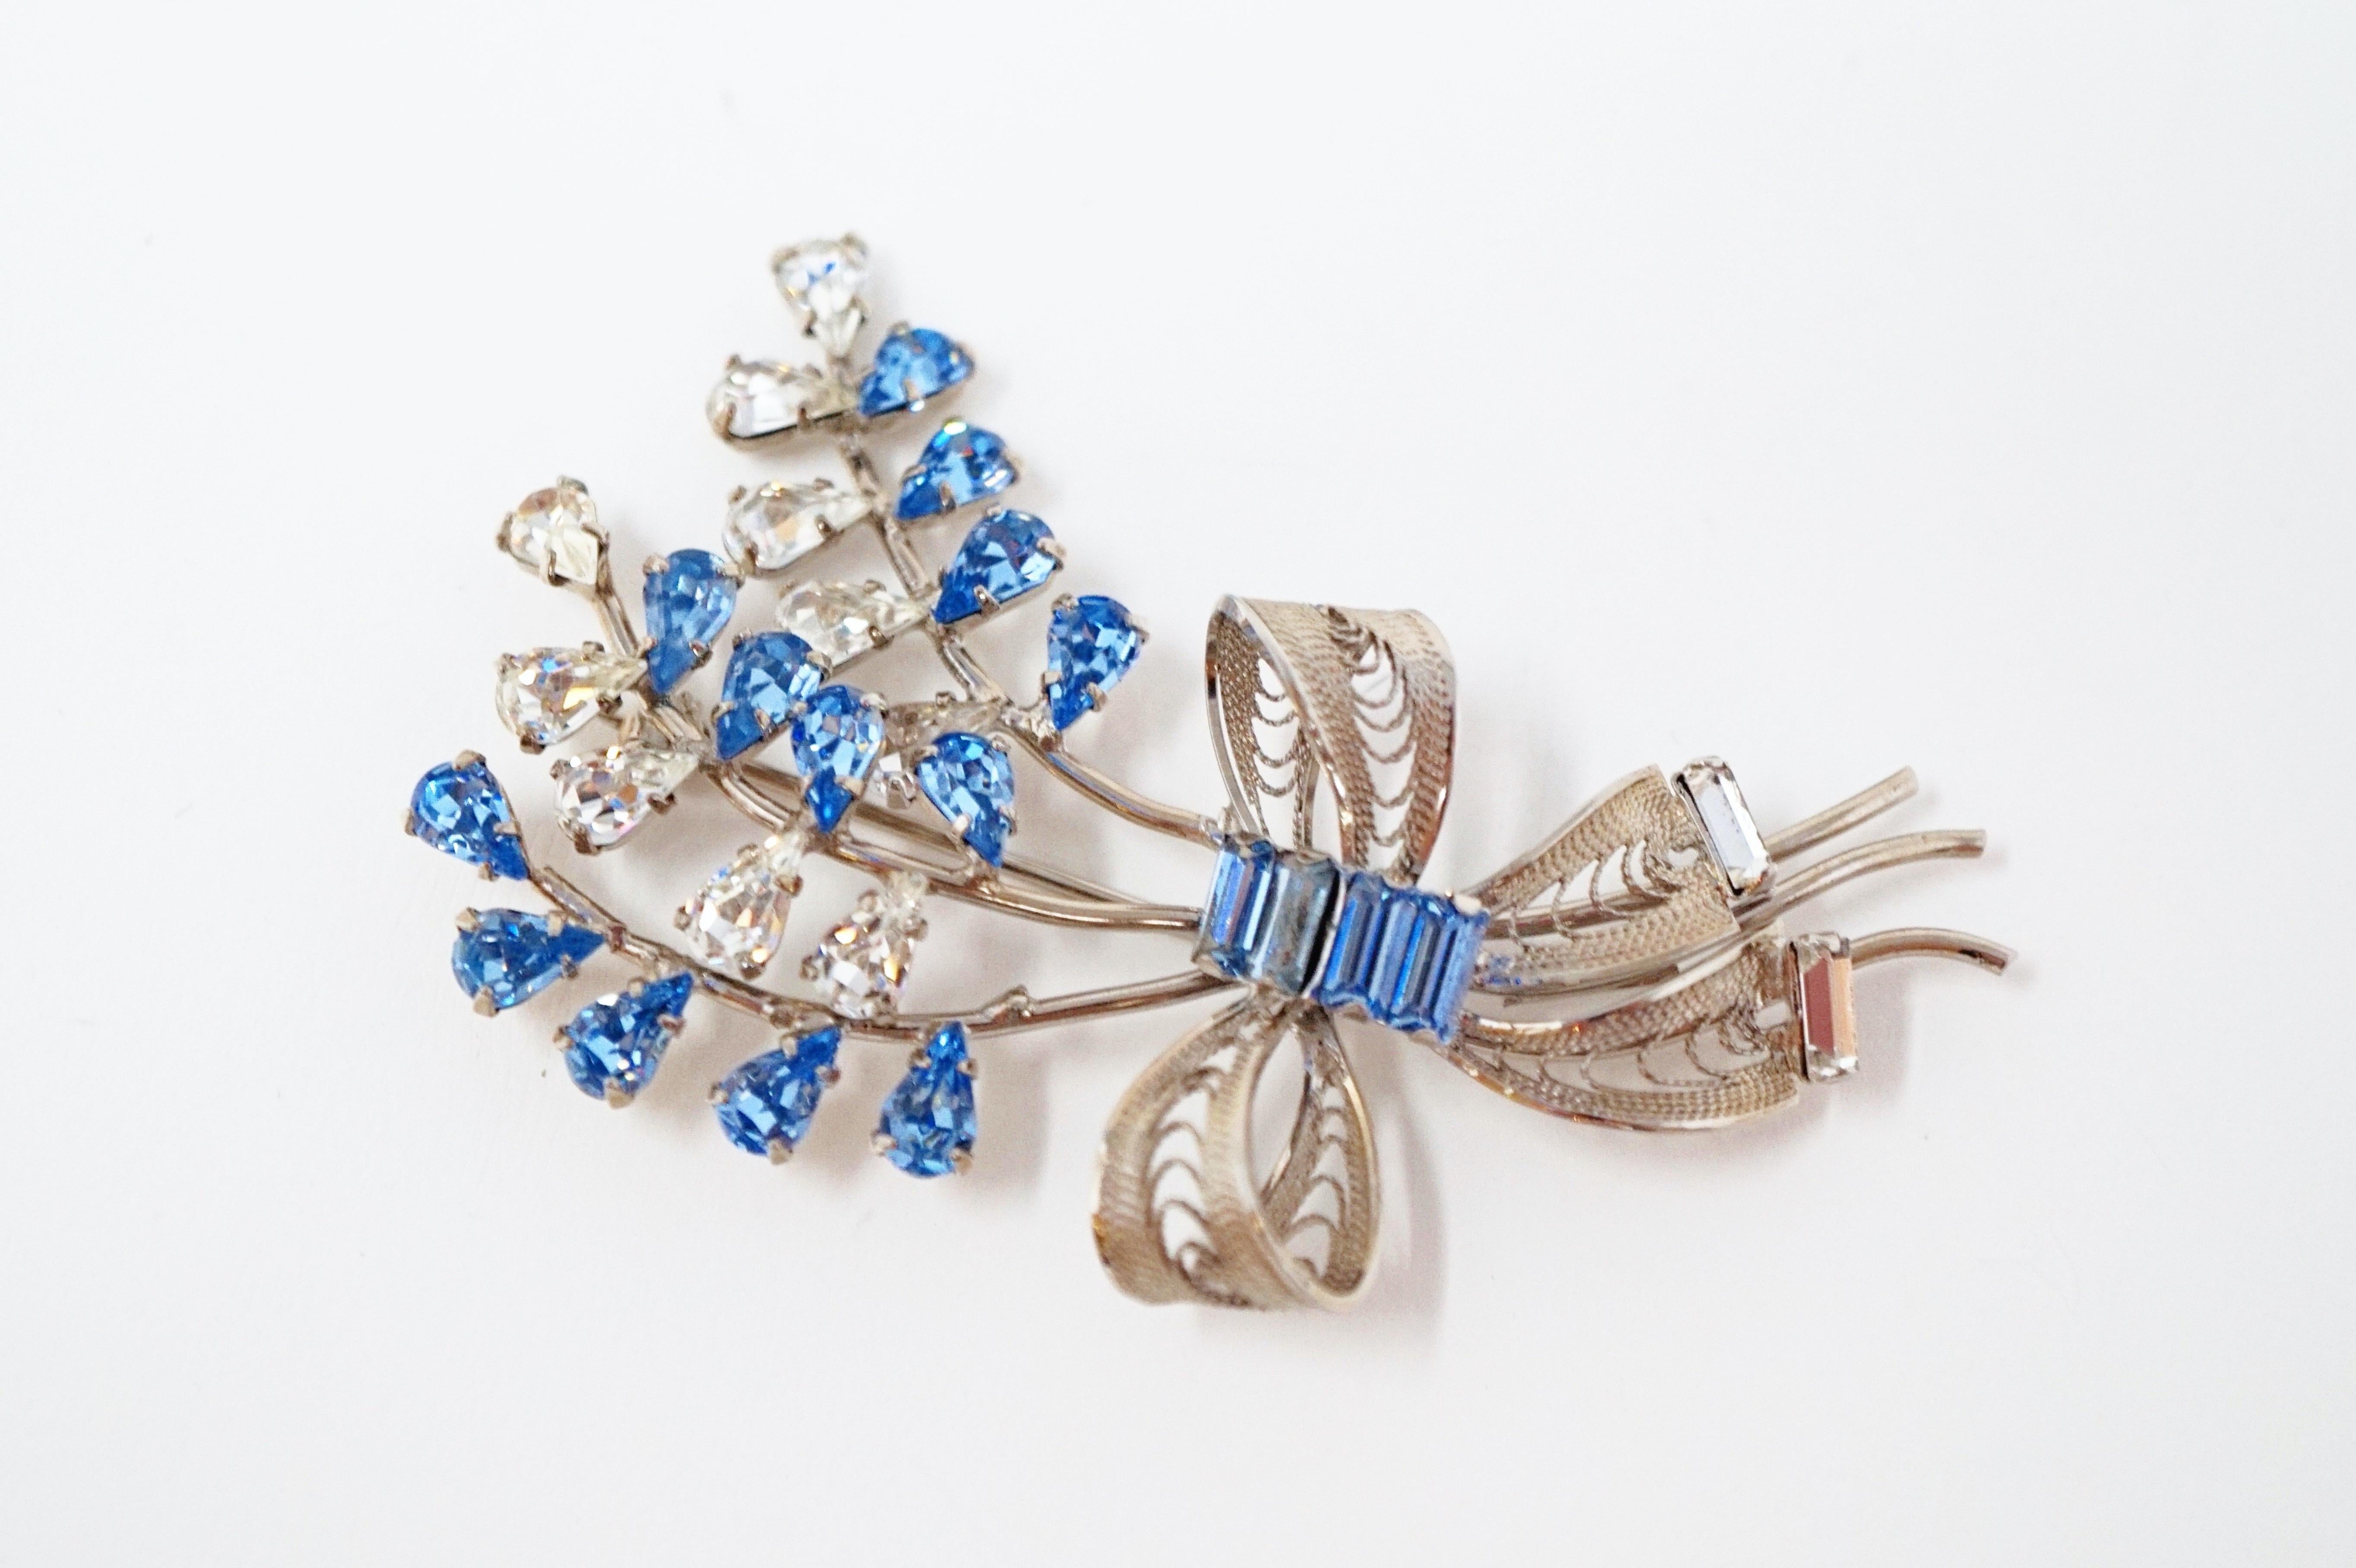 Beautiful vintage sterling silver and rhinestone brooch, circa mid-20th century.  Clear rhinestones alongside cornflower blue colored rhinestones in teardrop and baguette cuts sparkle and shine on this gorgeous piece.  A bow ties this bouquet